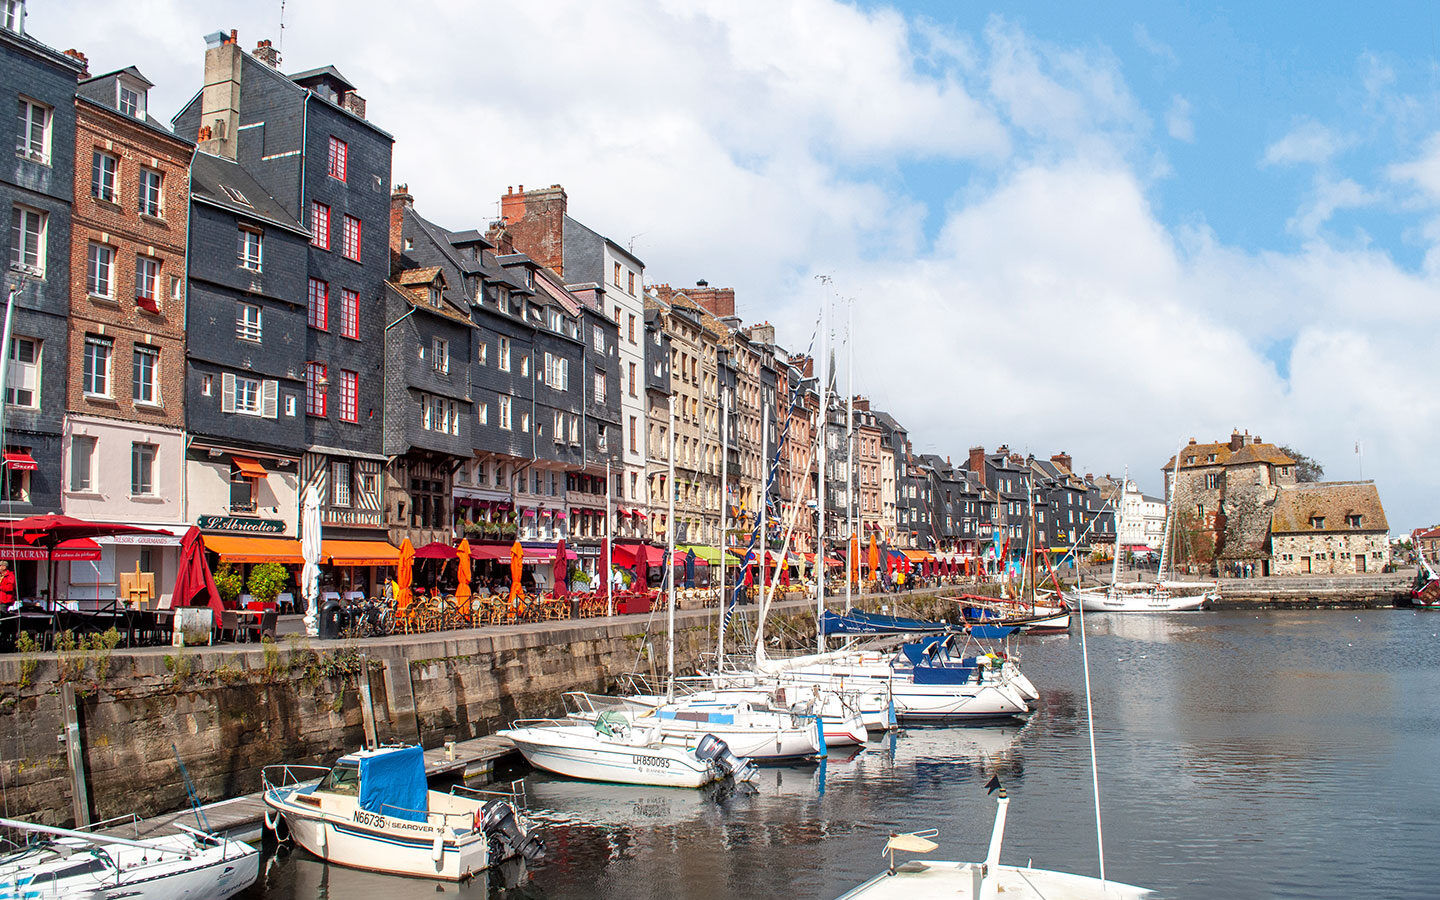 The colourful Vieux Bassin in Honfleur on the Normandy coast, France